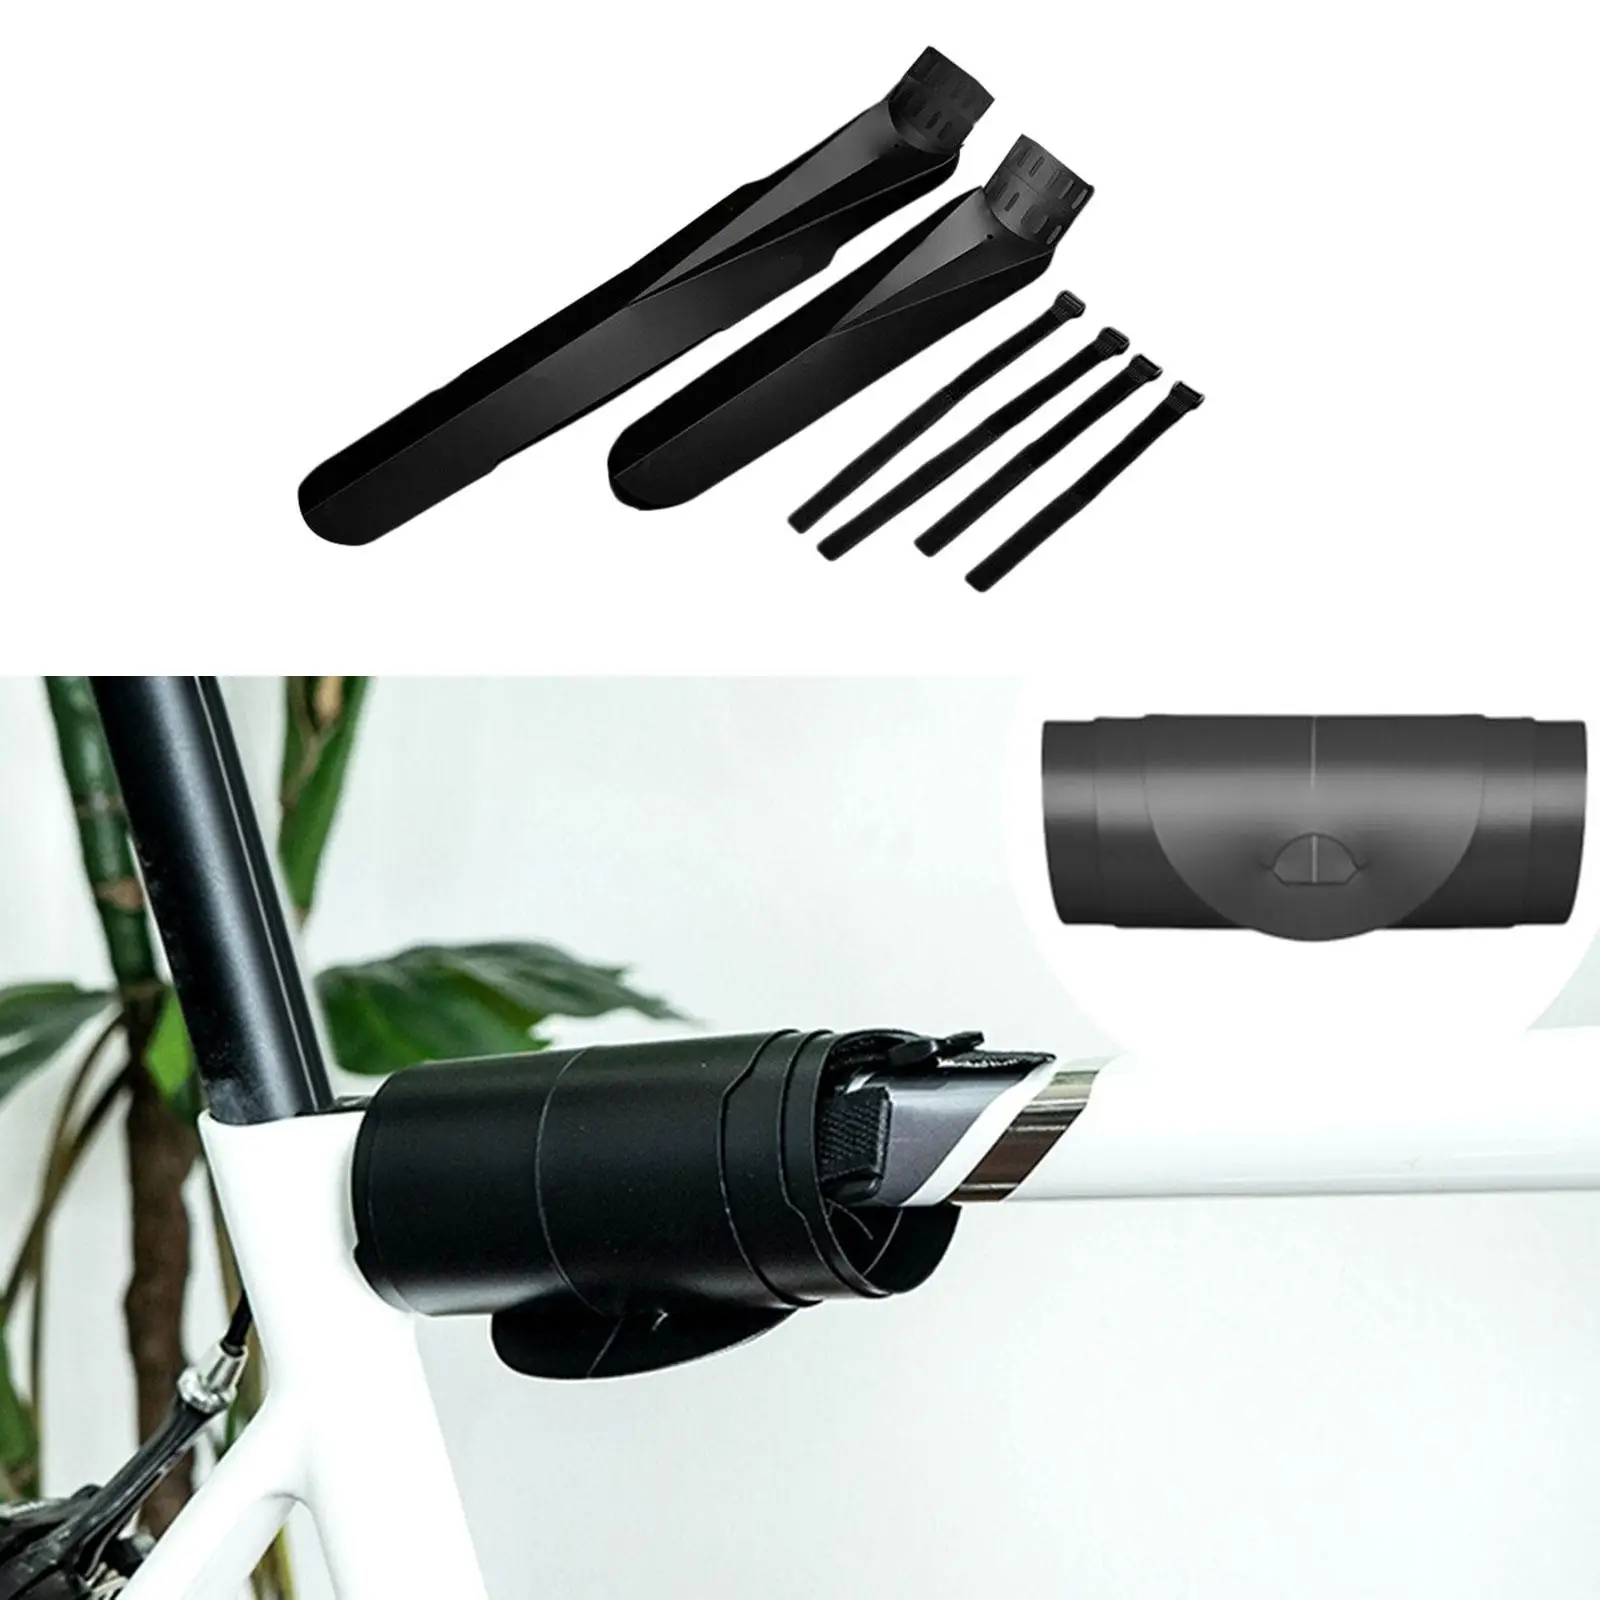 Bike Mudguard Foldable Accessories DIY Front Rear Set for Road Bike Cycling